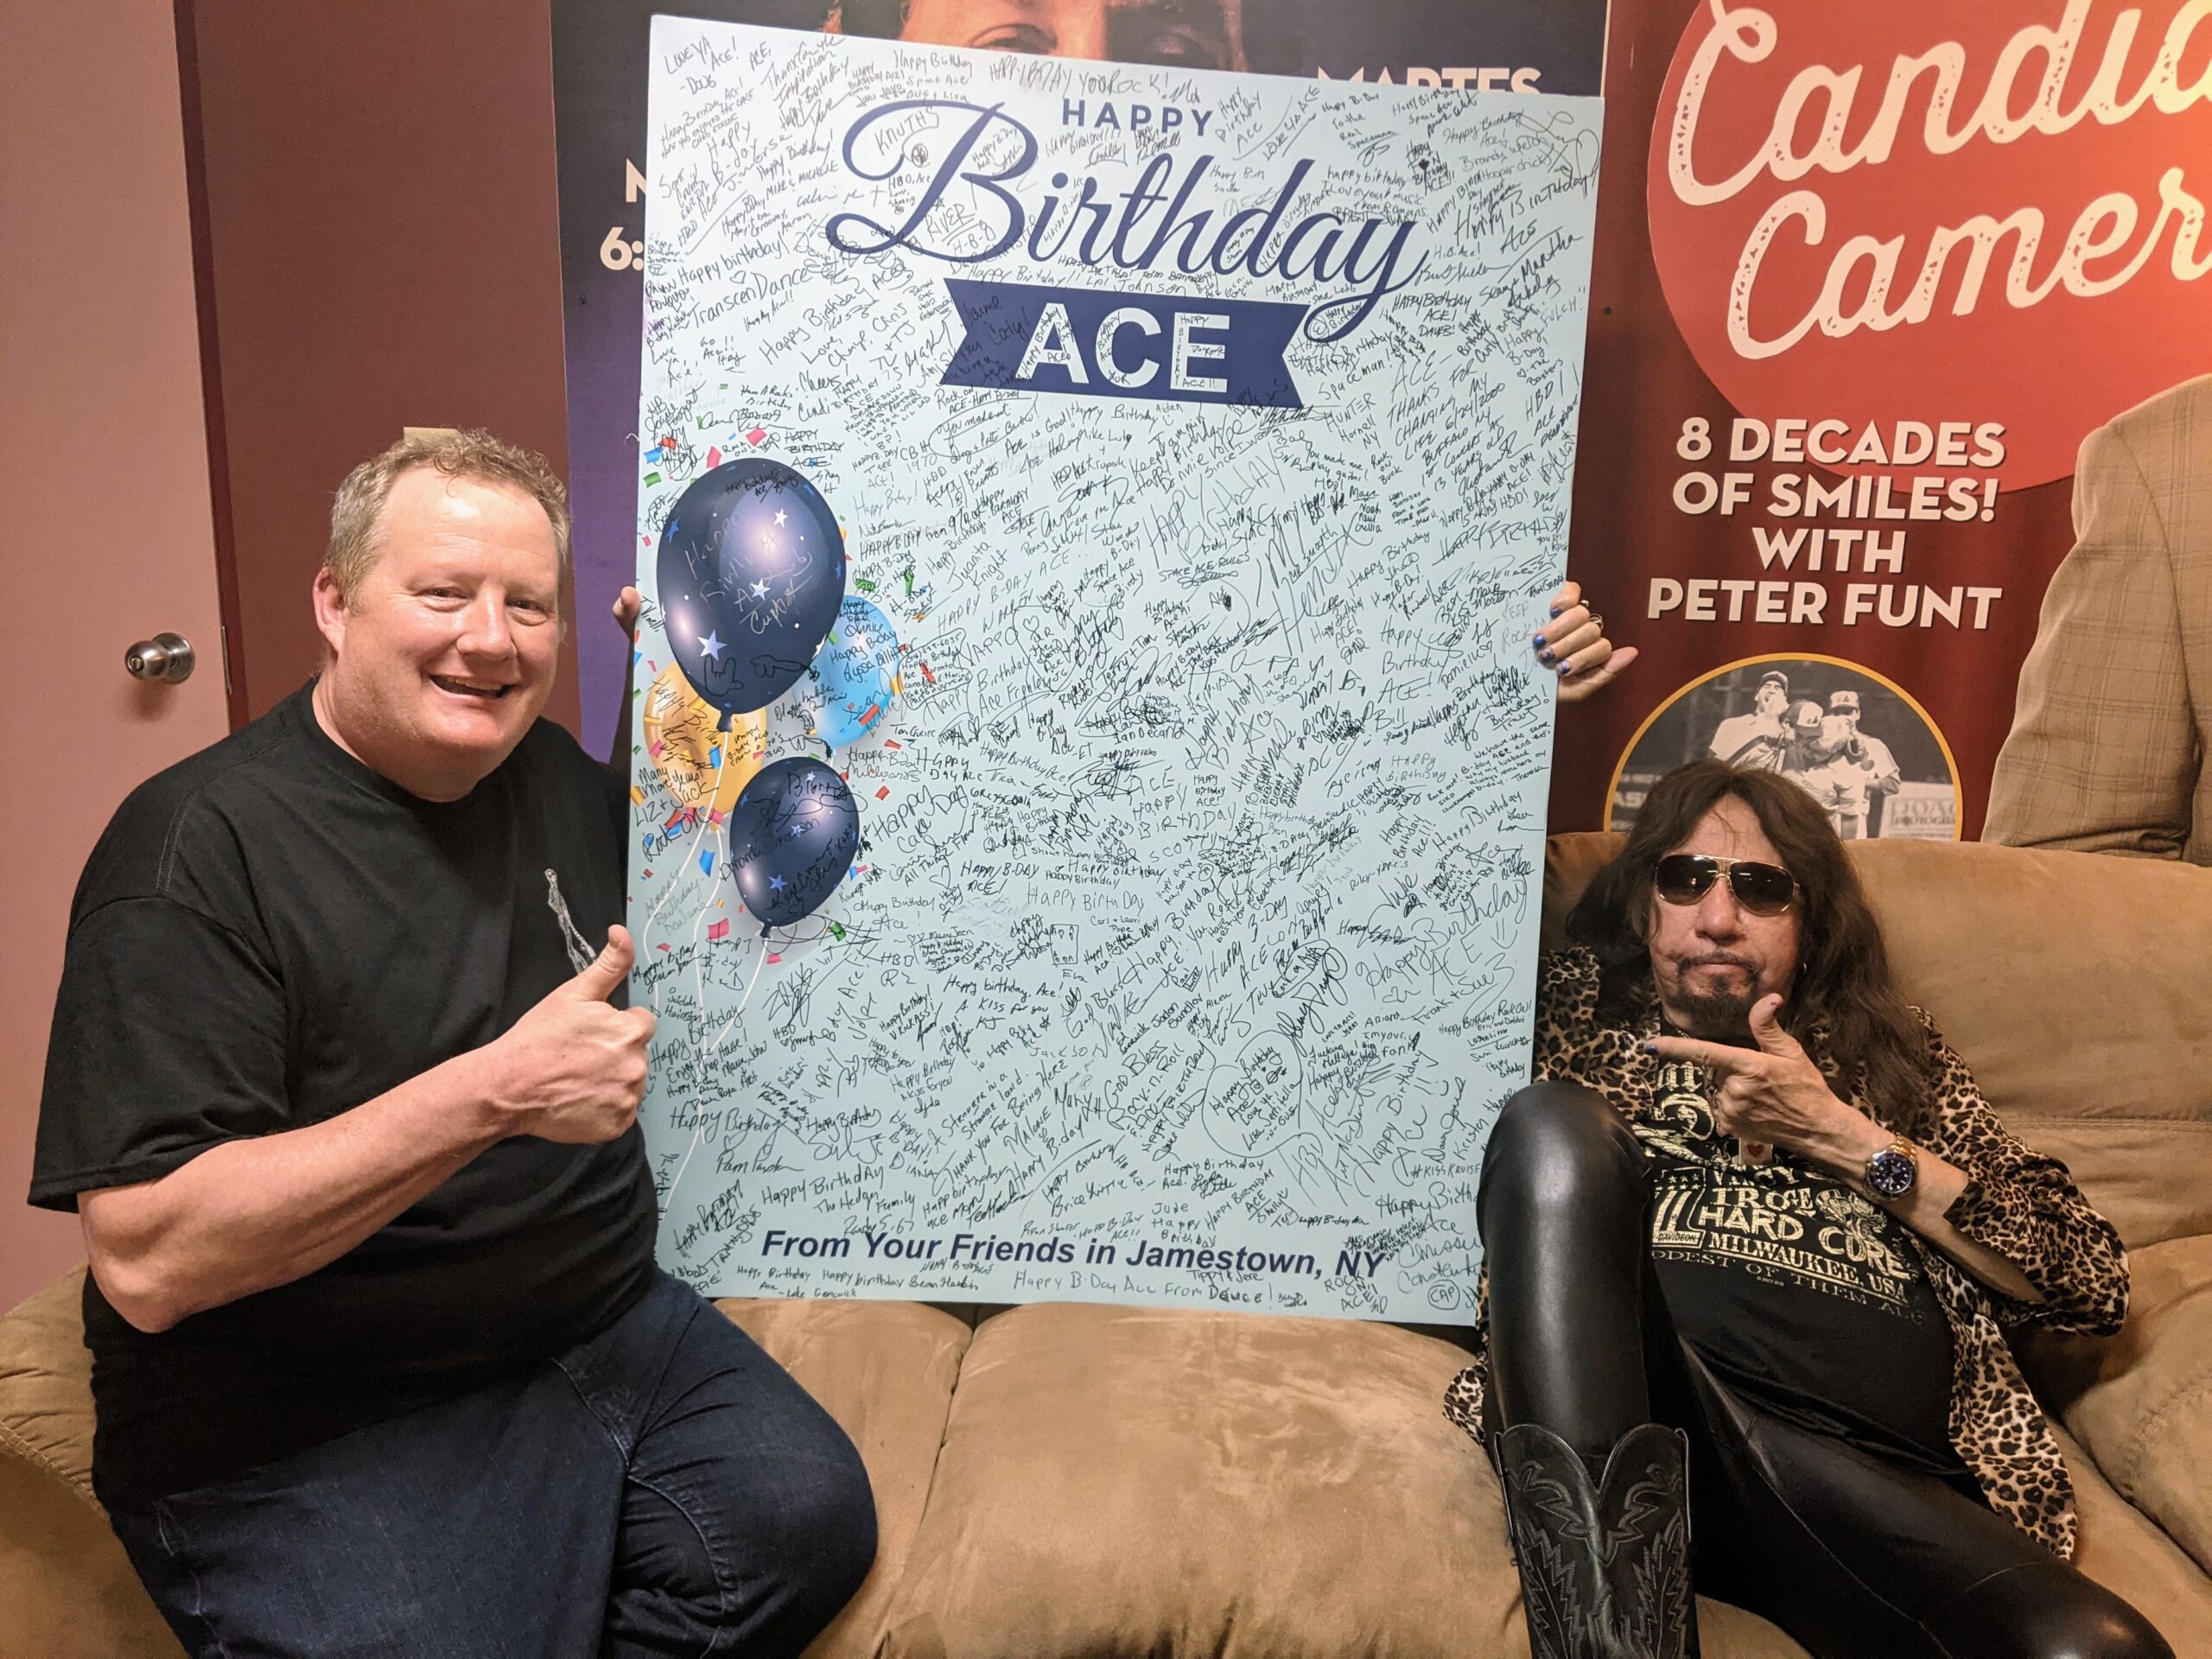 How Jamestown wished “Happy Birthday” to Rock & Roll Hall of Famer Ace Frehley